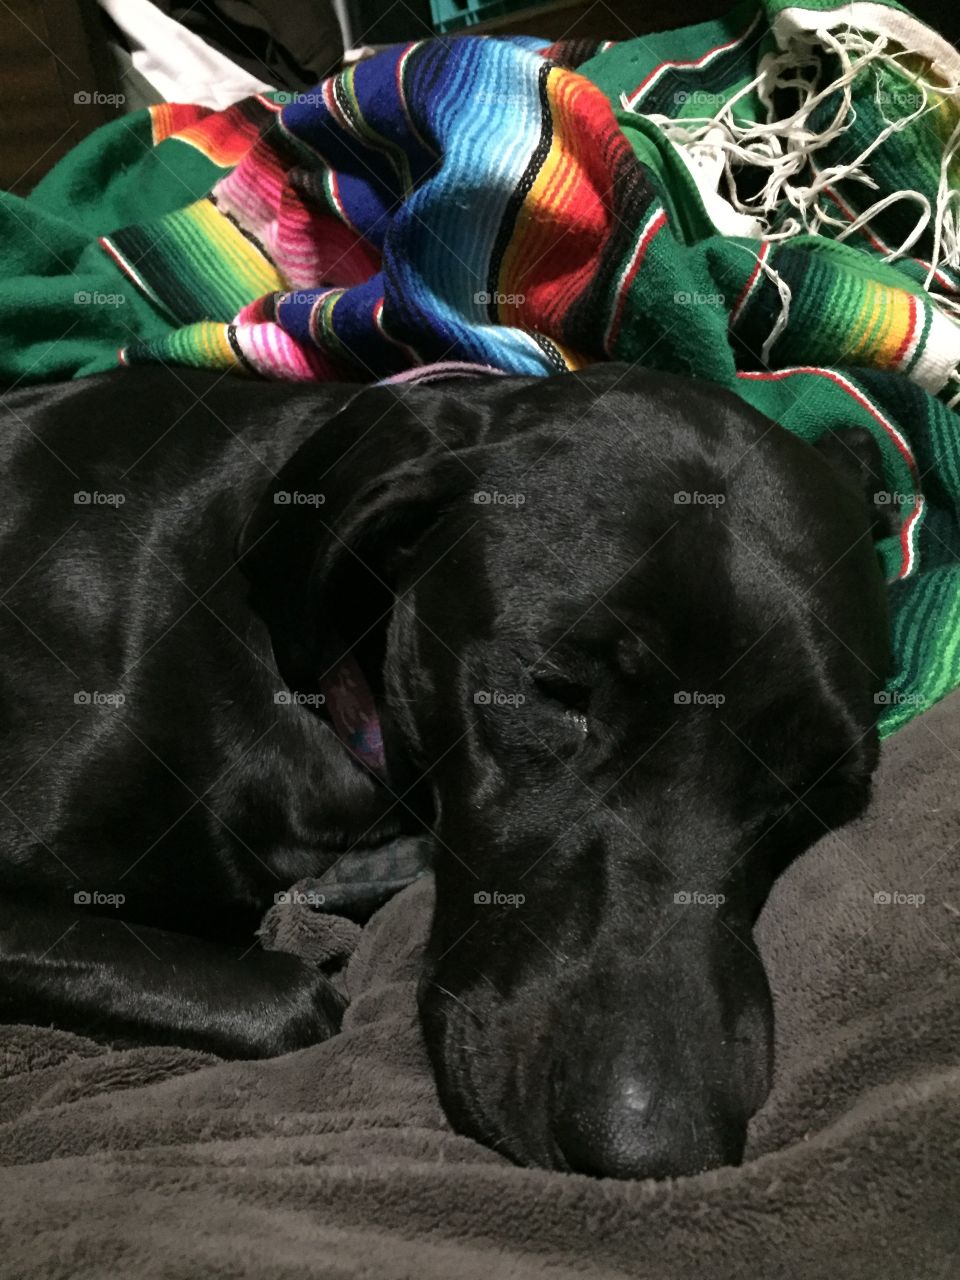 My black lab/german shorthaired pointer LOVES to sleep all day, especially under her blanket!